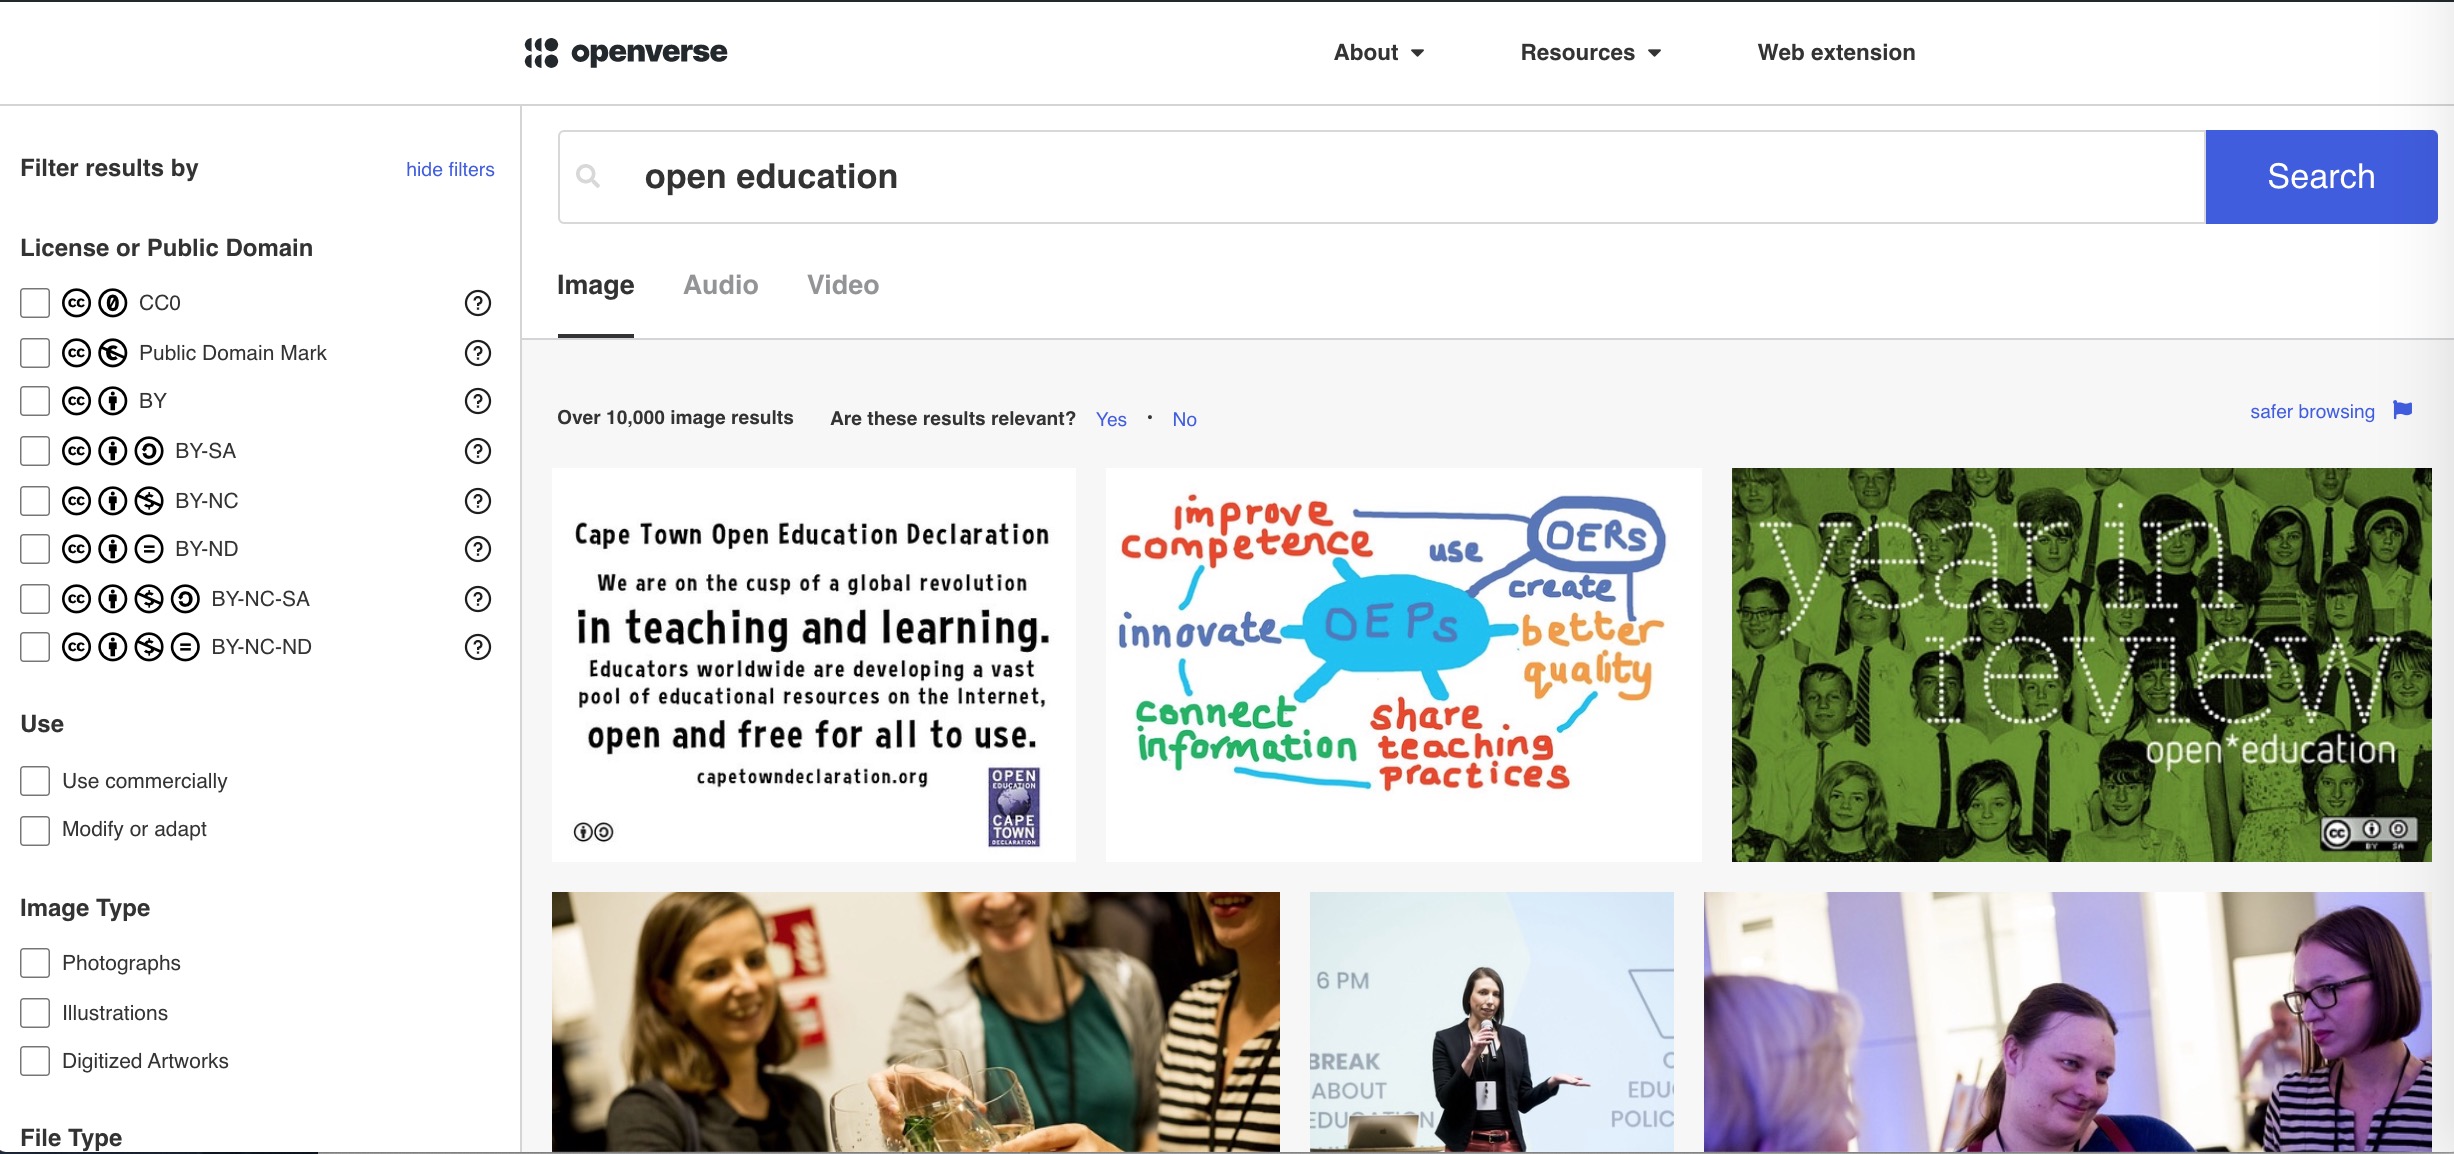 openverse search results for "open education"